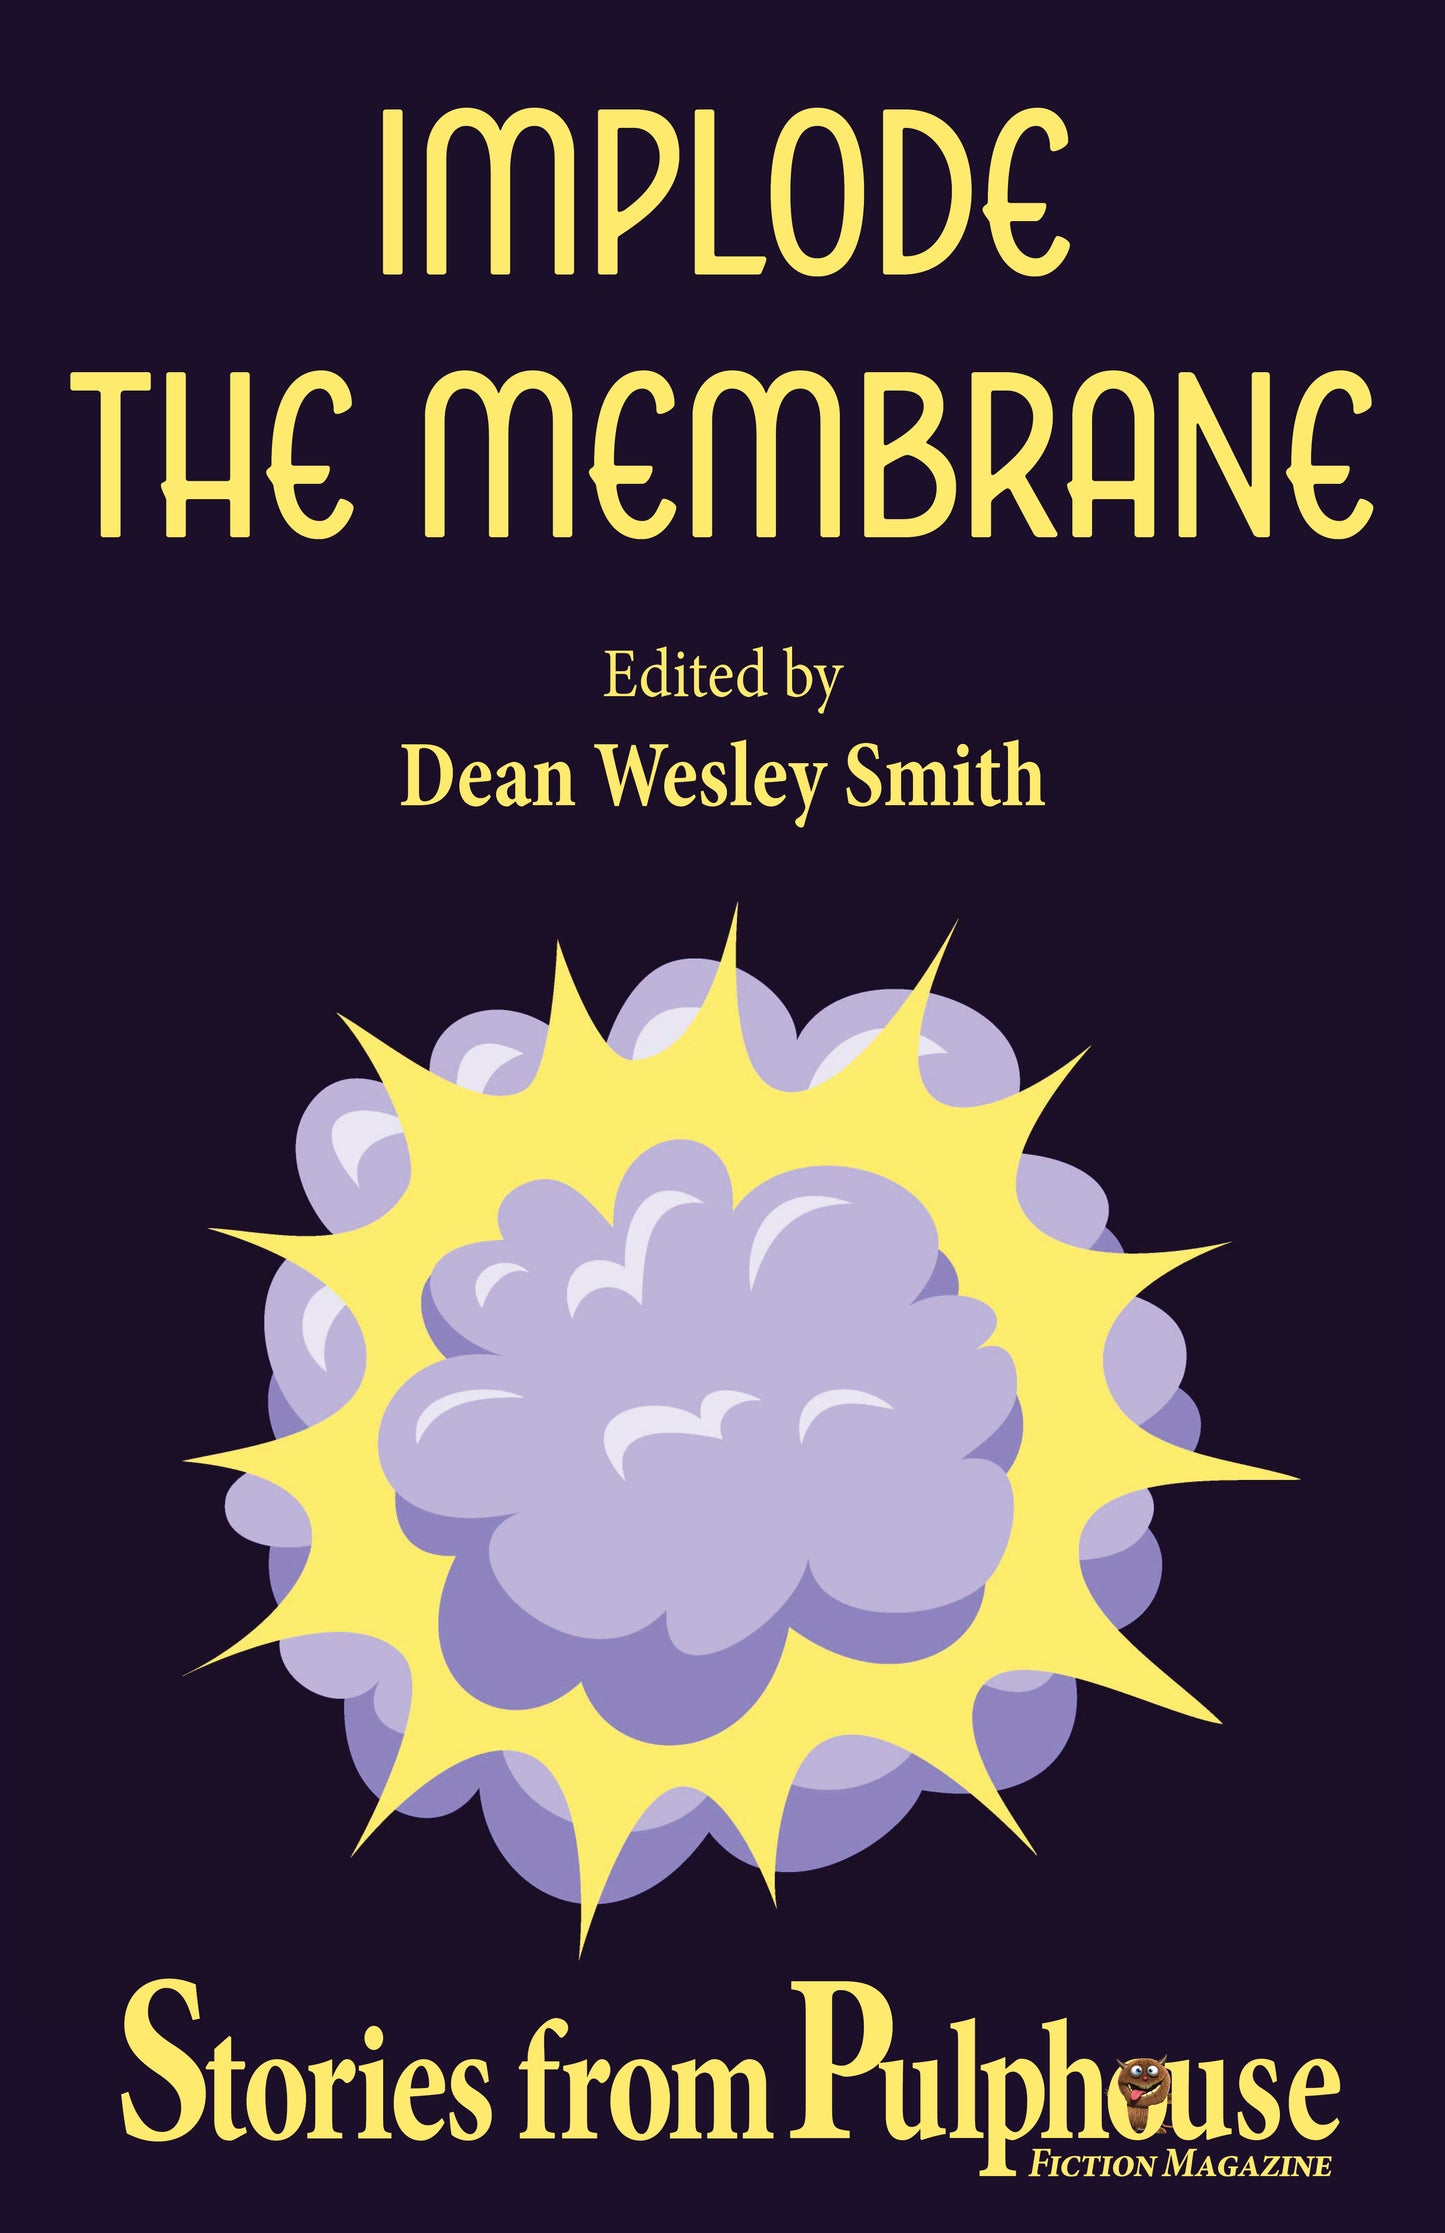 Implode the Membrane: Stories from Pulphouse Fiction Magazine Edited by Dean Wesley Smith (EBOOK)